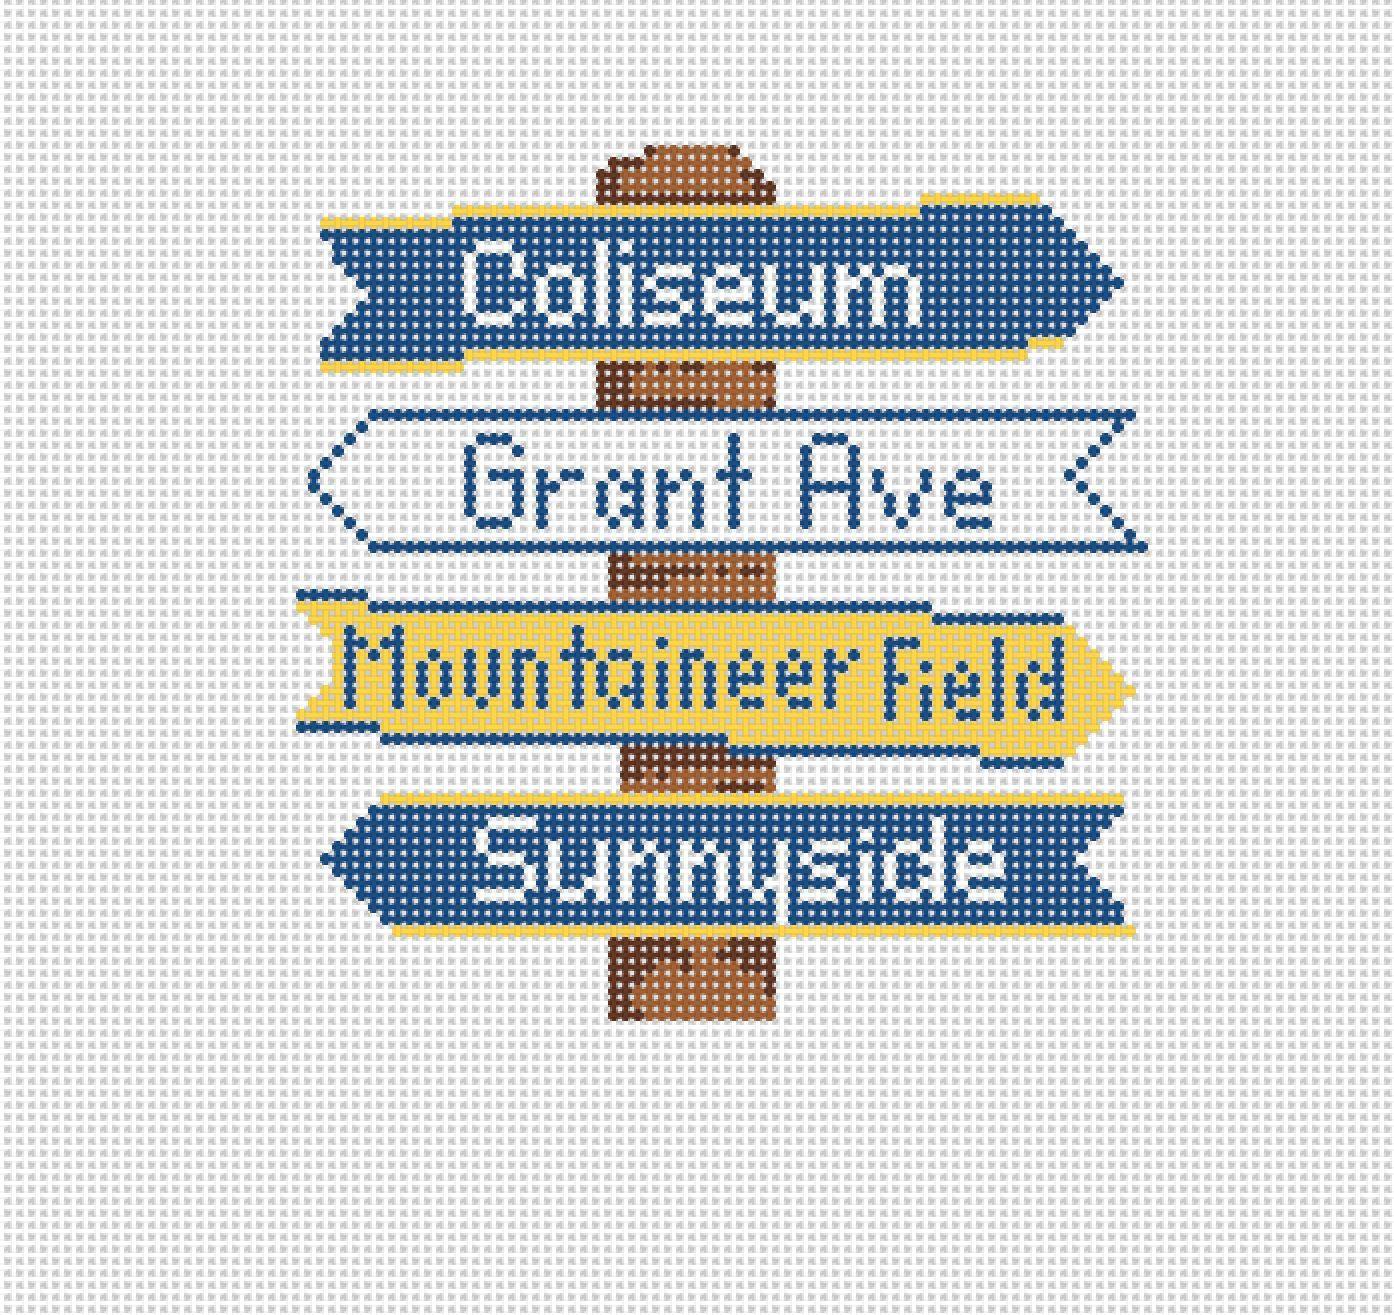 WVU College Icon Destination Sign - Needlepoint by Laura